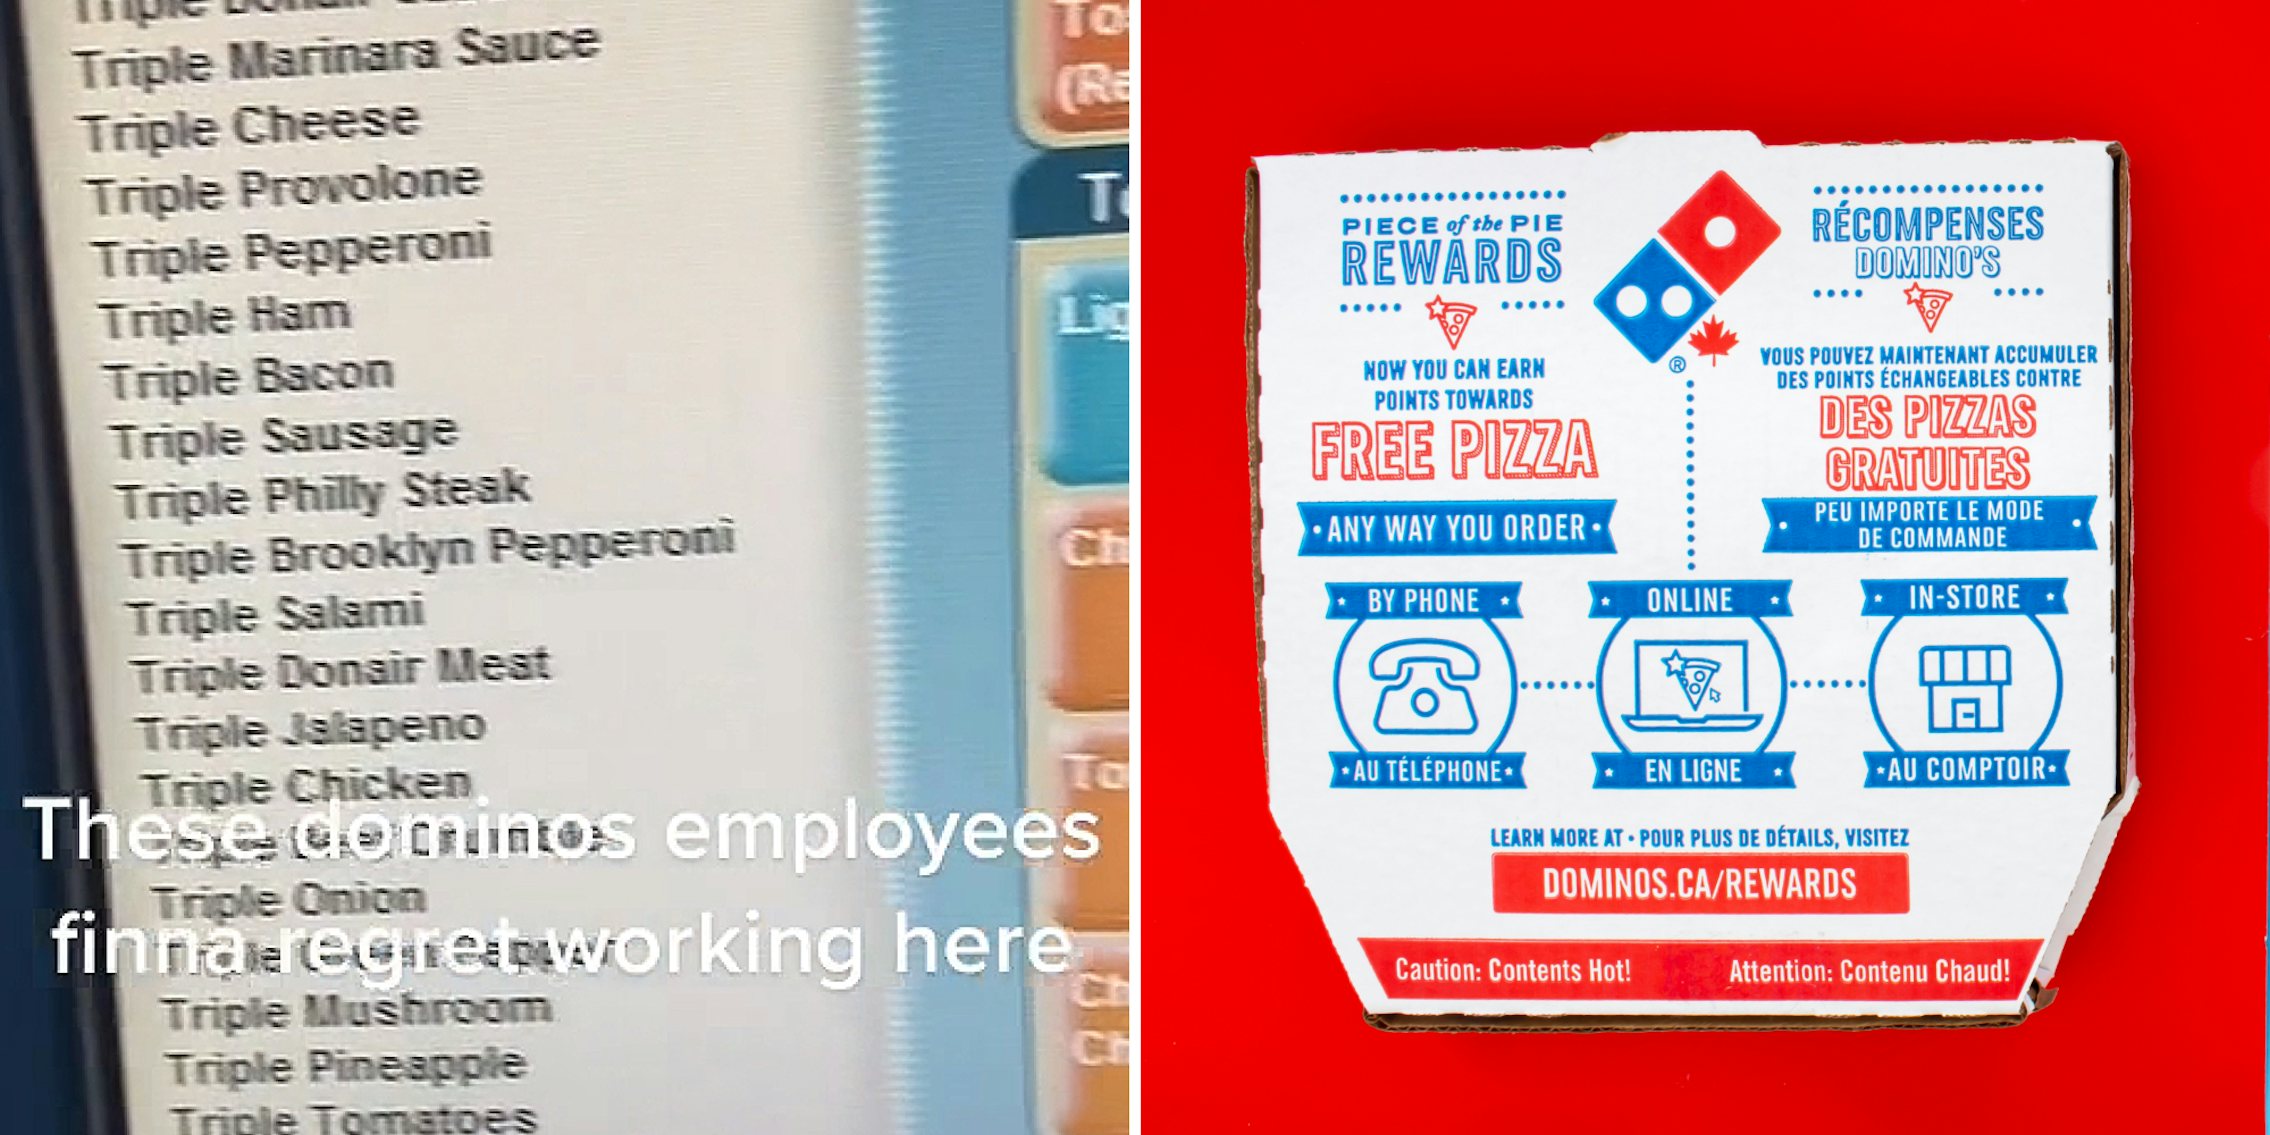 Dominos order screen with list of toppings caption 'These dominos employees finna regret working here' (l) Dominos Pizza box on red background (r)